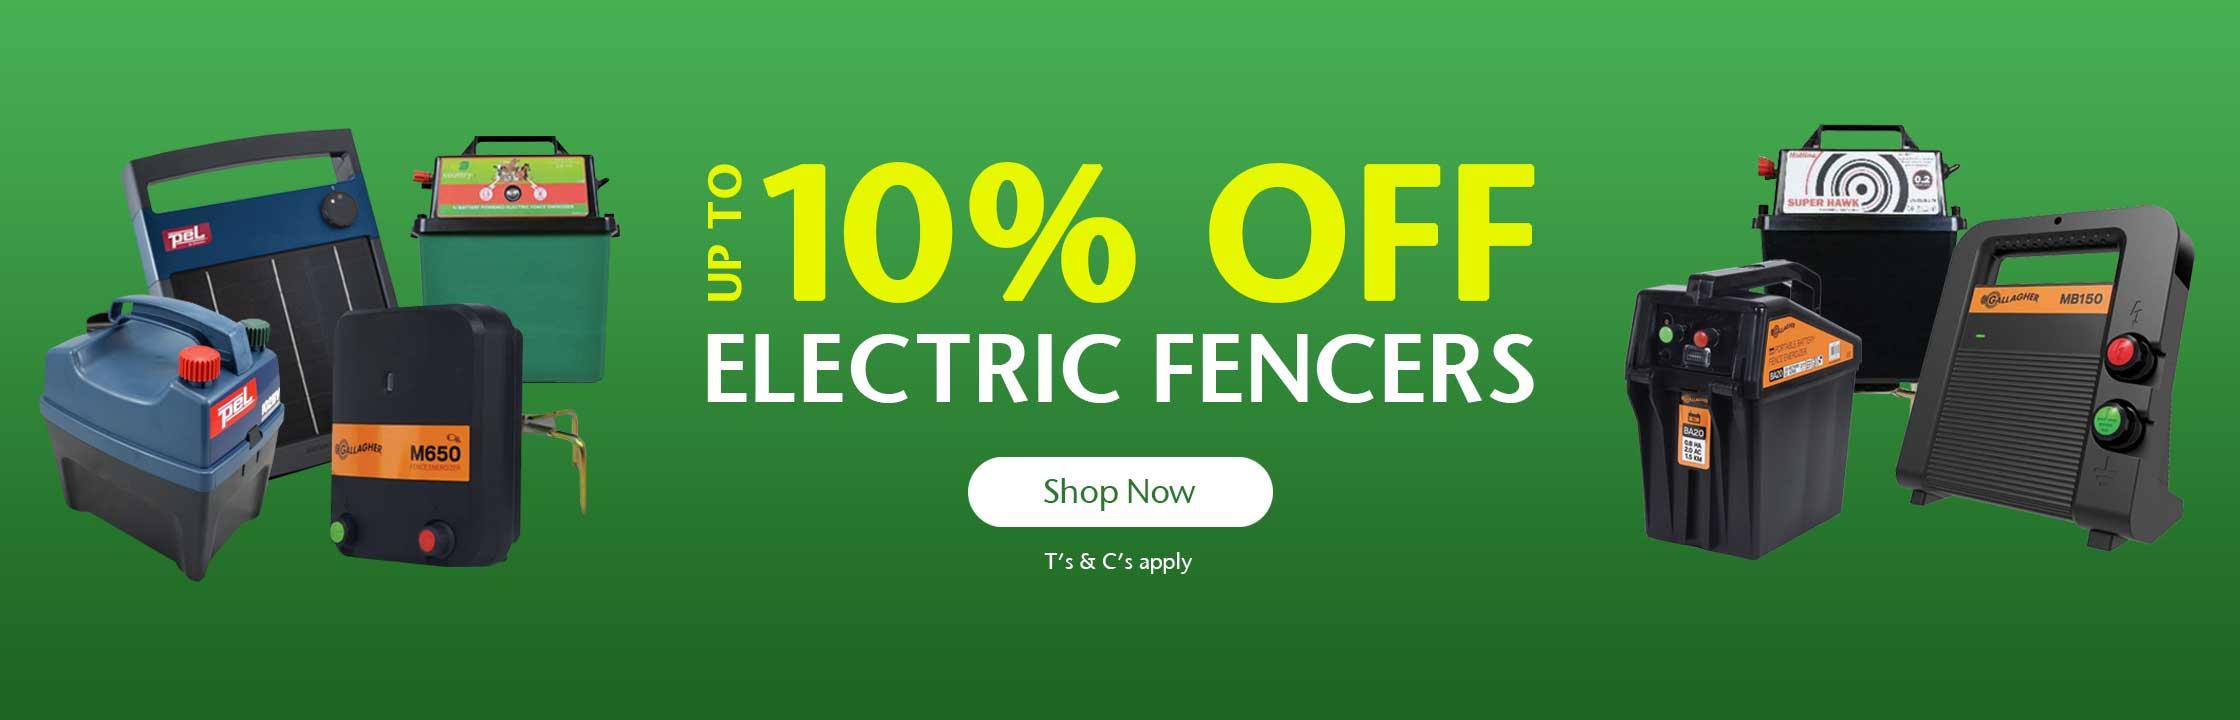 Up to 10% OFF Electric Fencing 